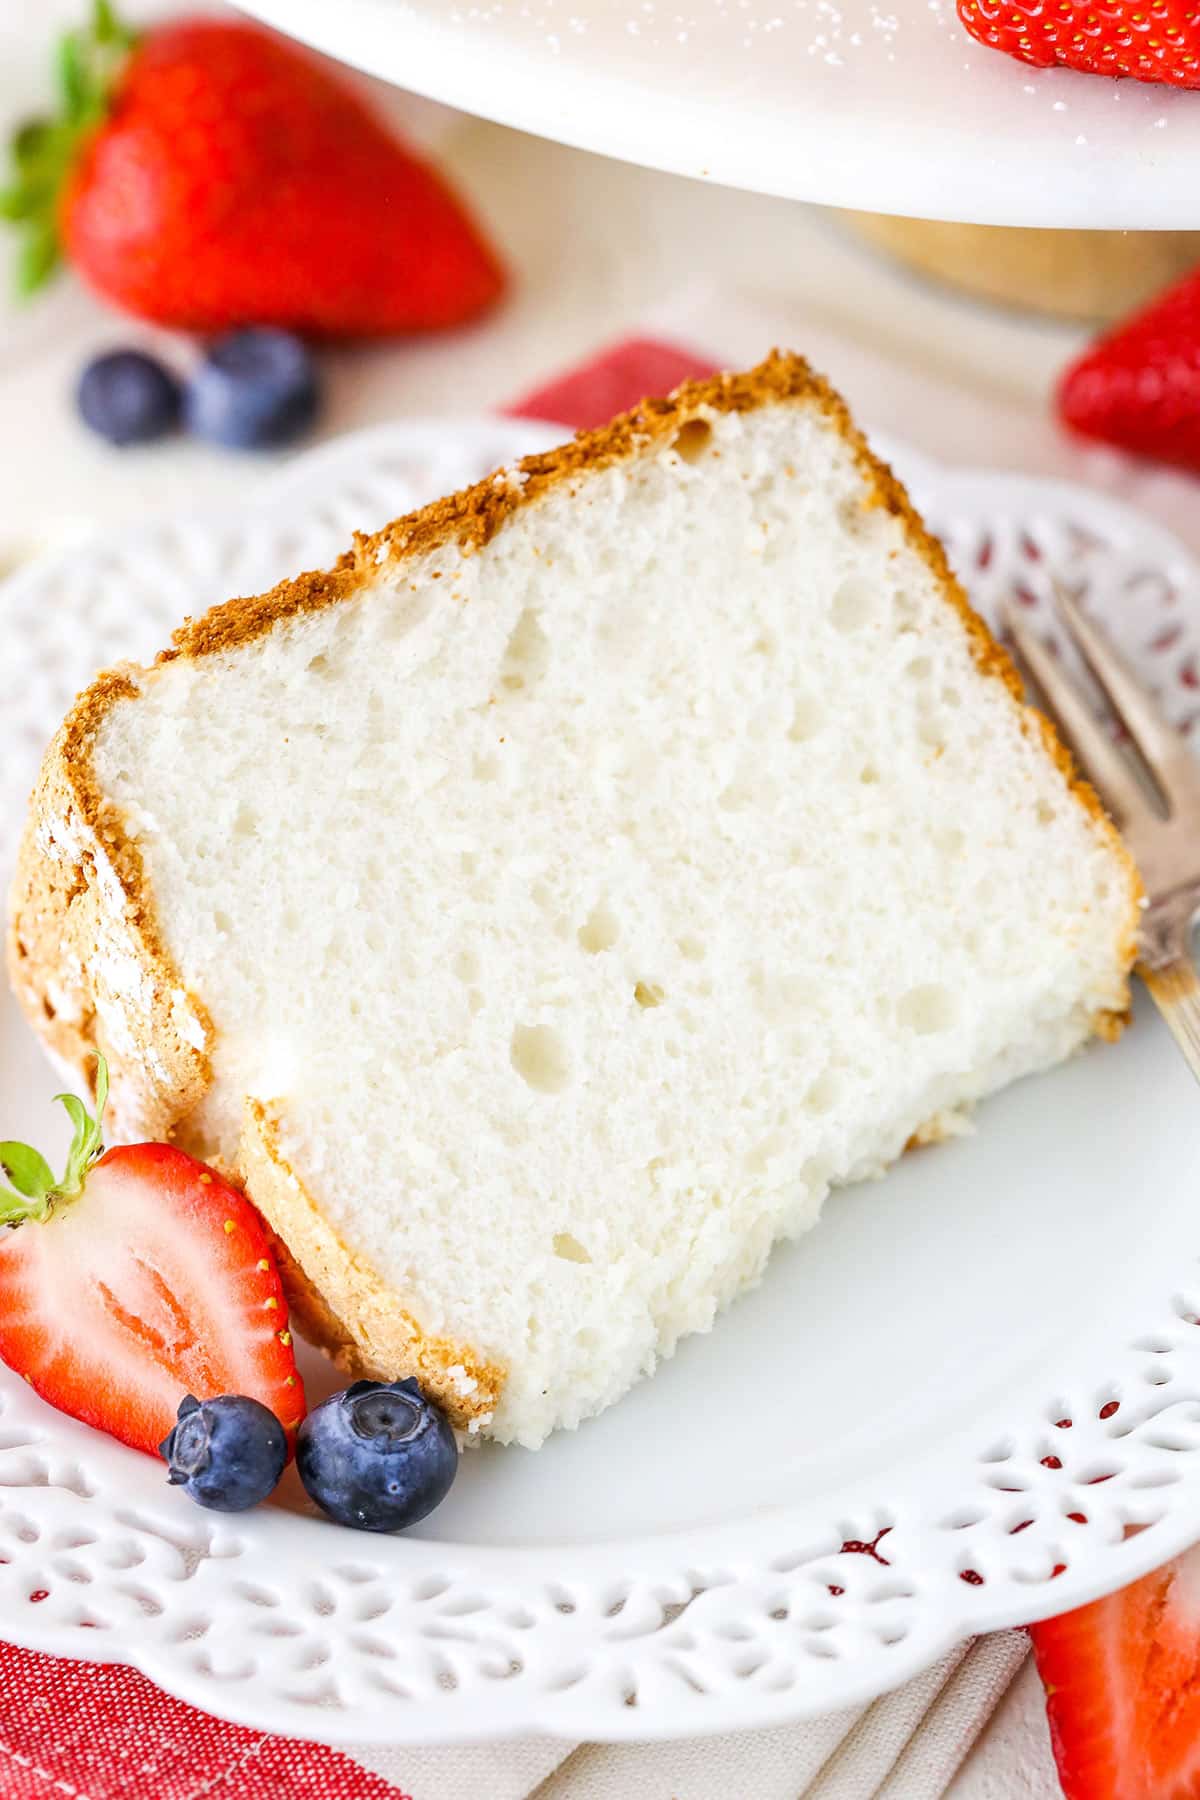 A slice of angel food cake on a plate with fresh berries.